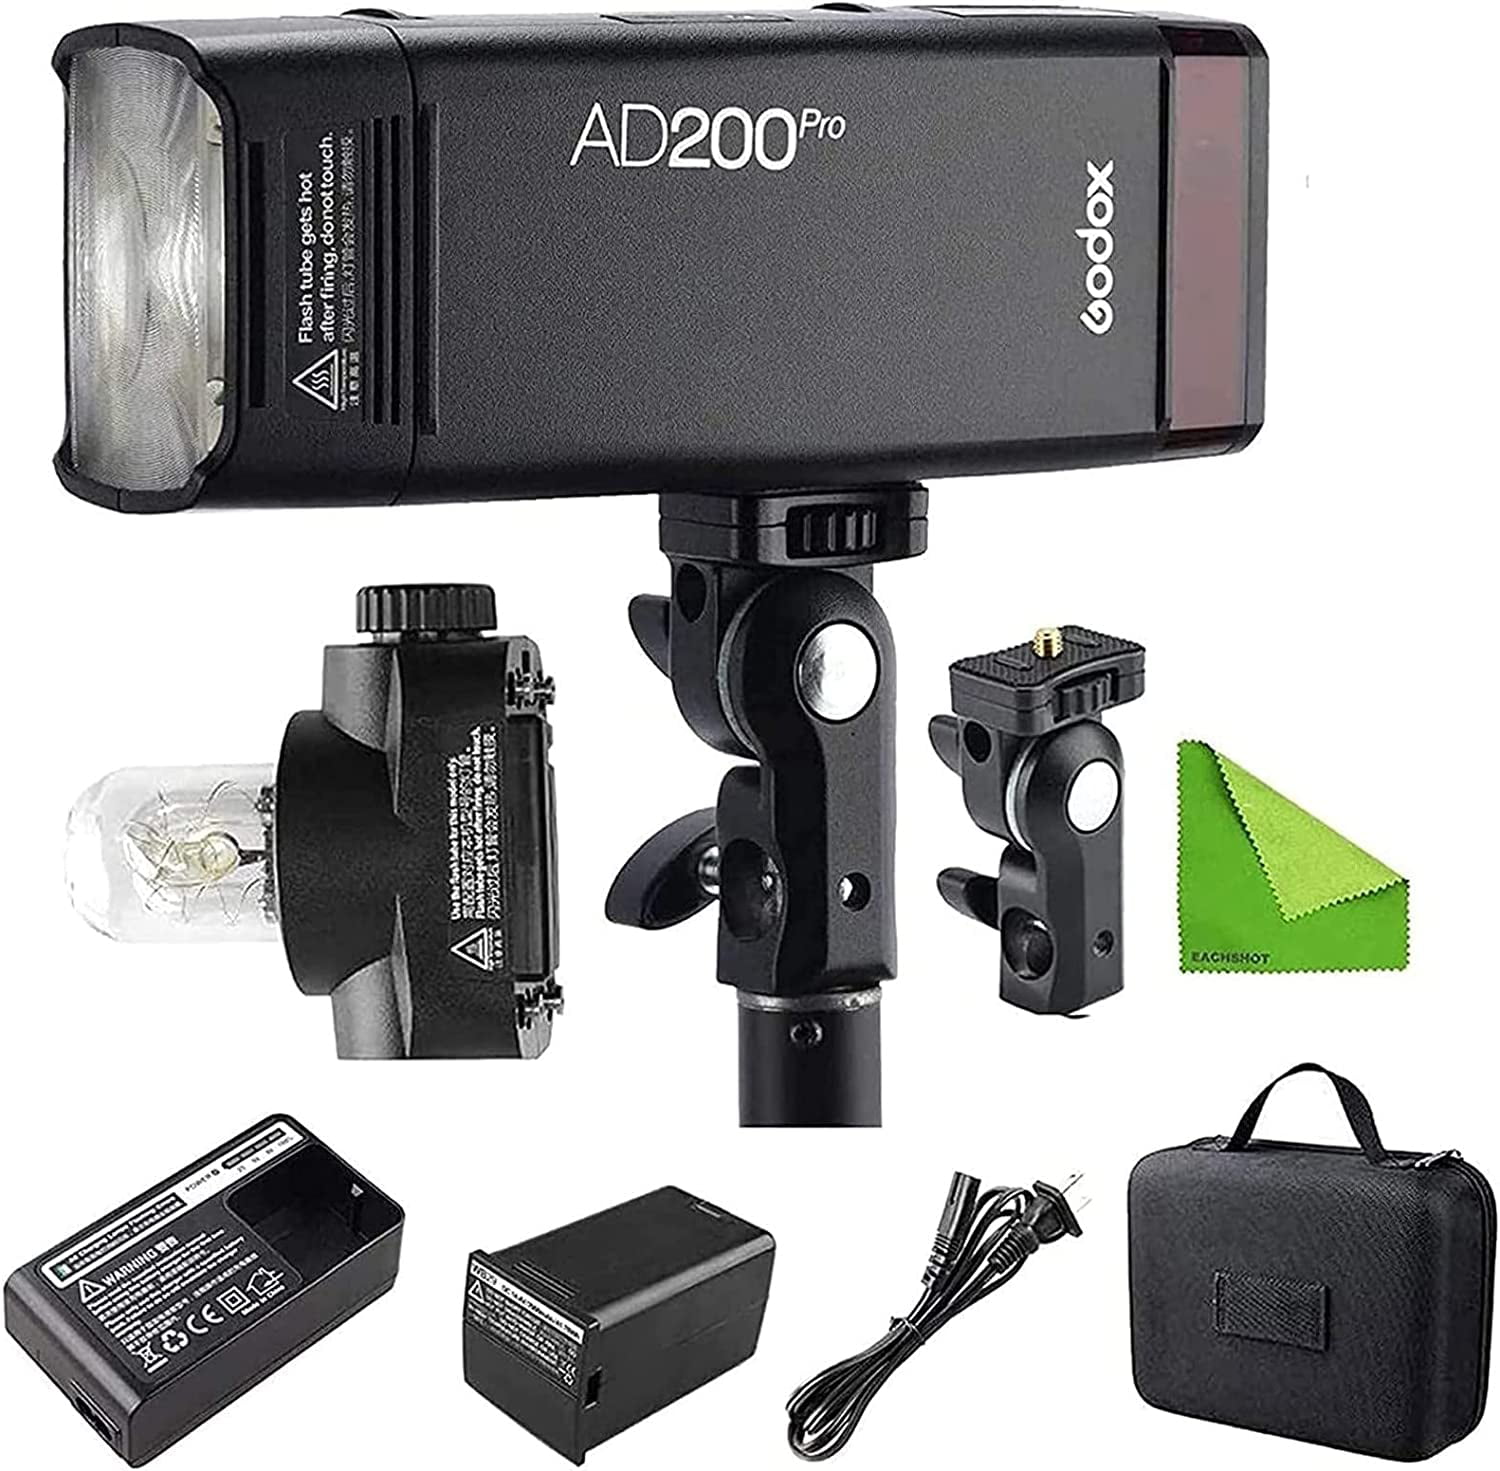 Godox AD600BM 600Ws GN87 1/8000 HSS Outdoor Flash Strobe Monolight with X1T-S TTL Wireless Flash Trigger and 8700mAh Battery with MI Shoe Like A77II A7RII A7R A58 A99 ILCE6000L 